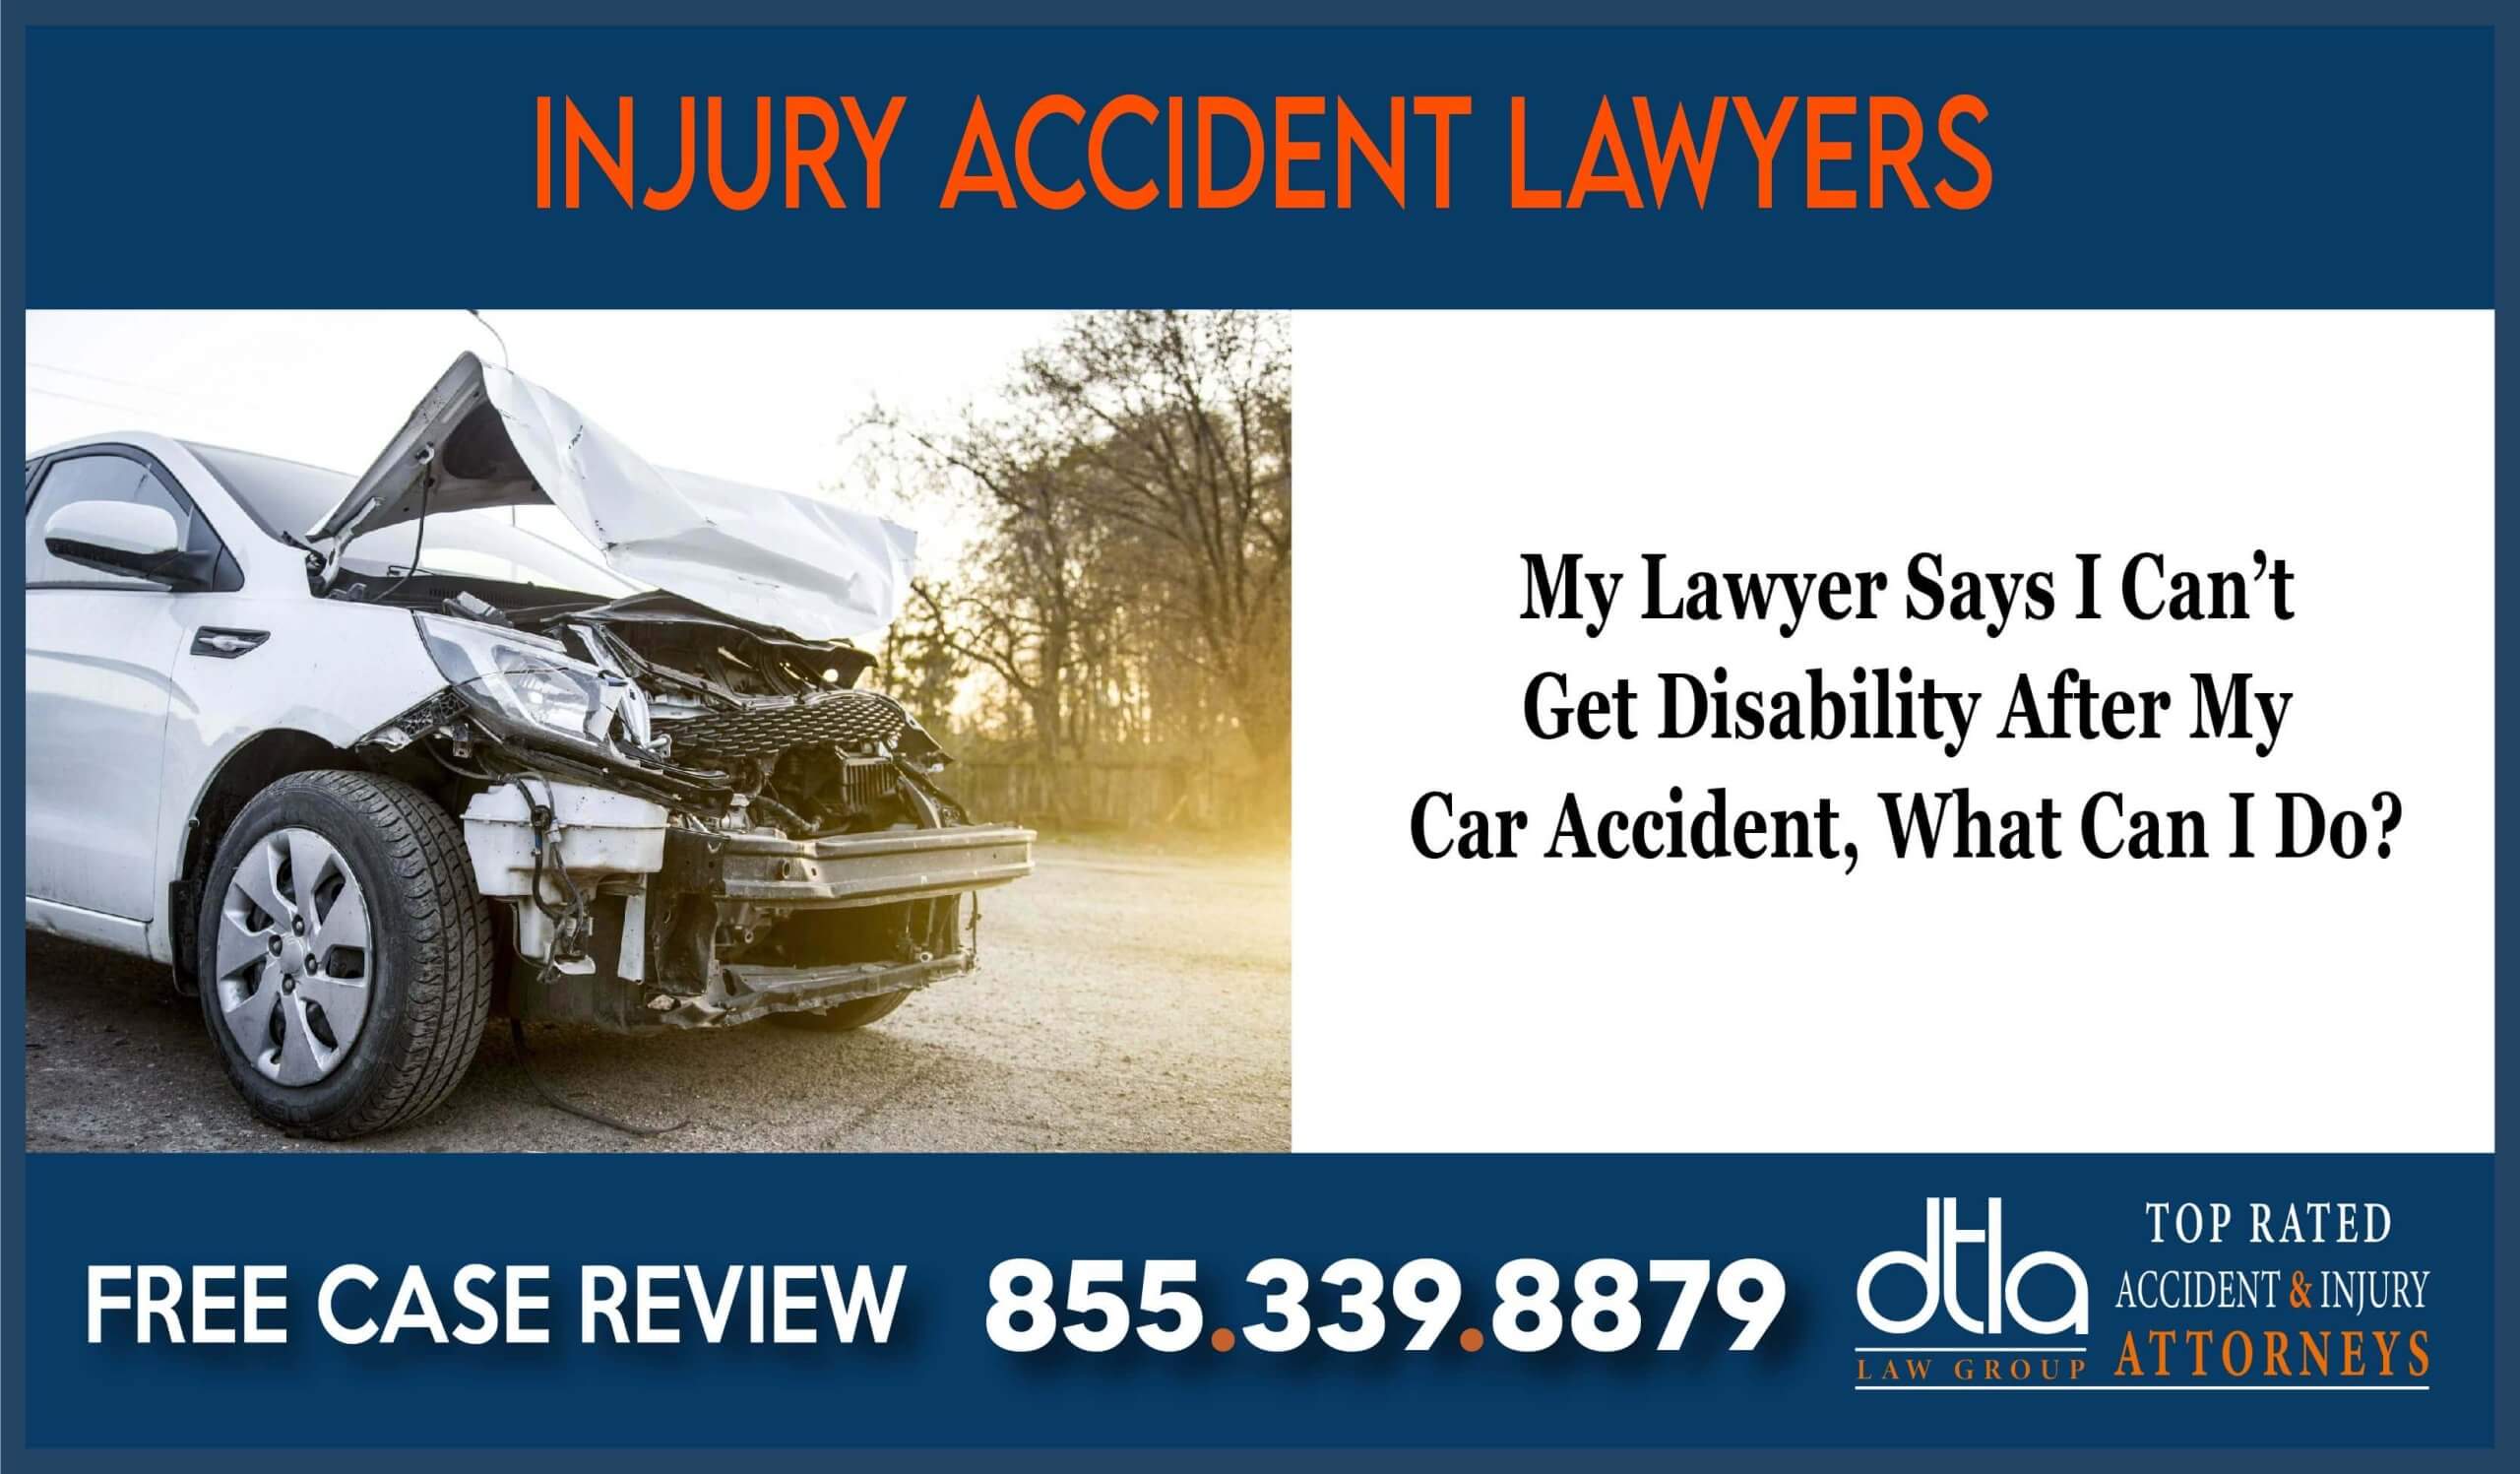 My Lawyer Says I Cant Get Disability After My Car Accident What Can I Do lawyer attorney sue lawsuit compensation